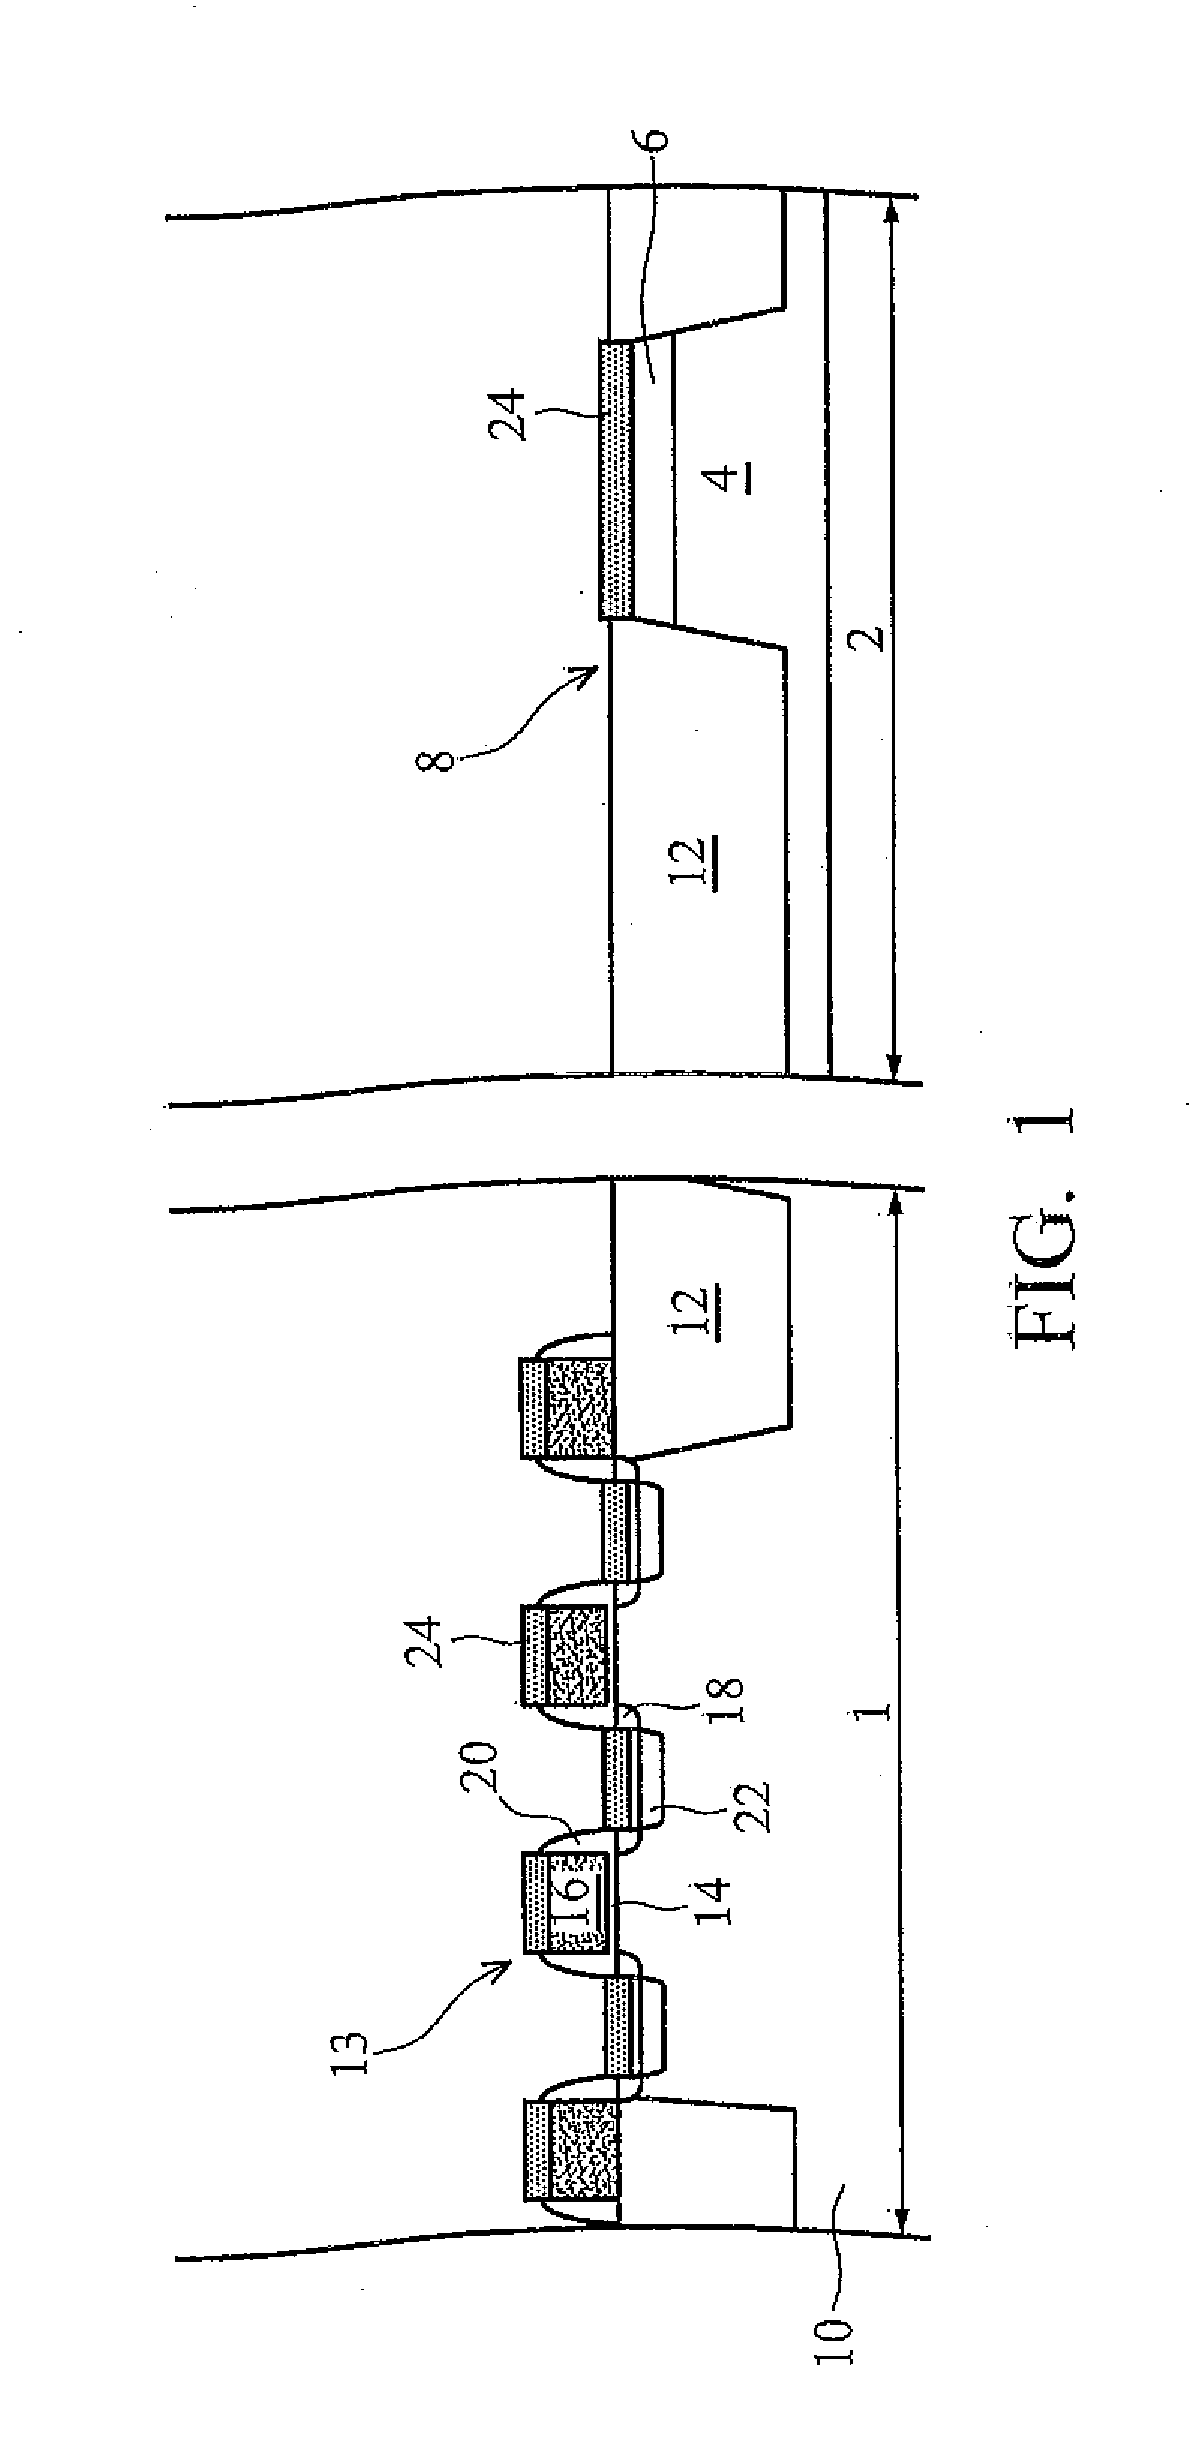 Structure for protecting metal-insulator-metal capacitor in memory device from charge damage